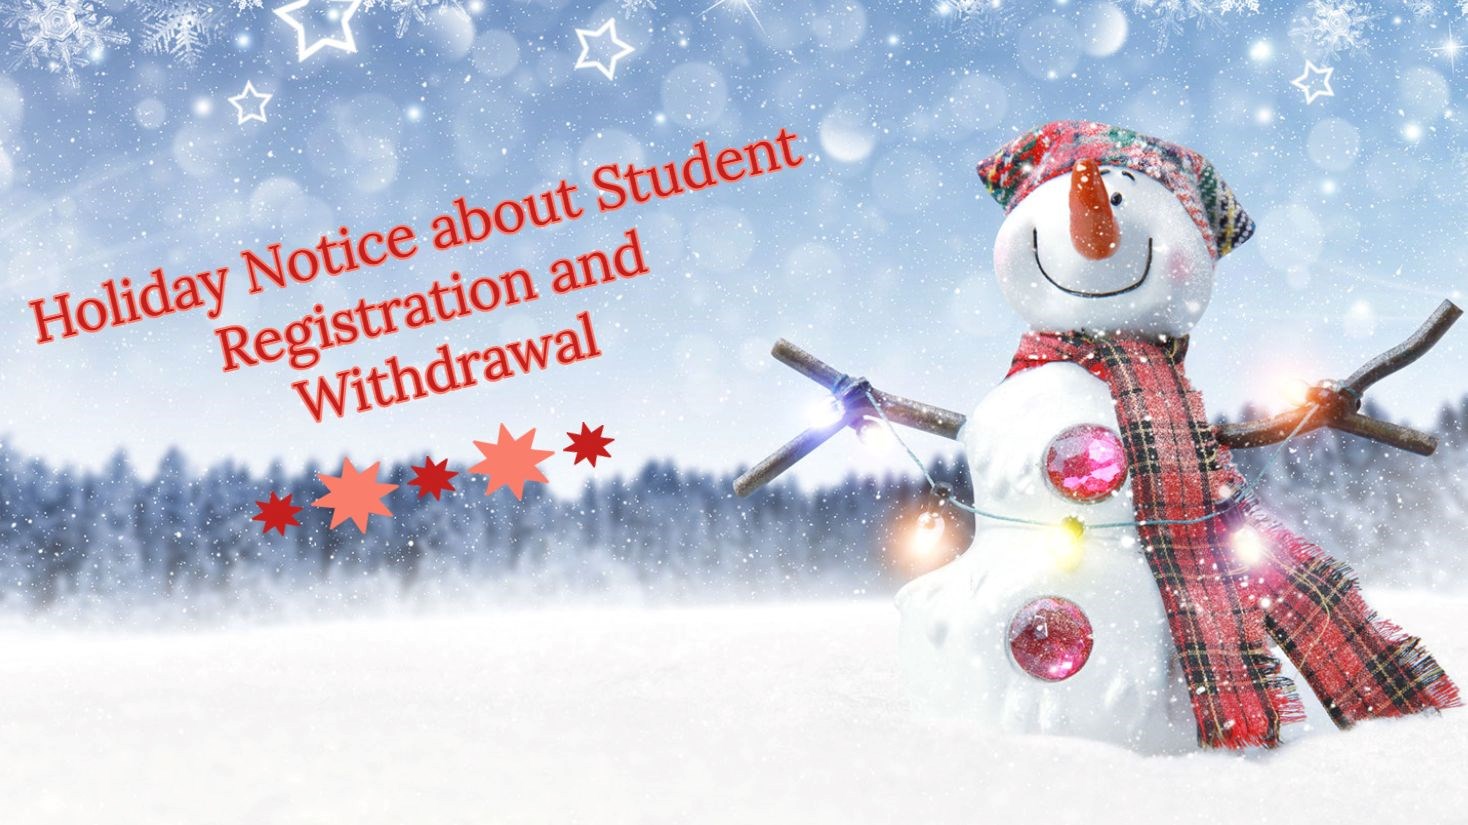 Holiday Notice about Student Registration and Withdrawal